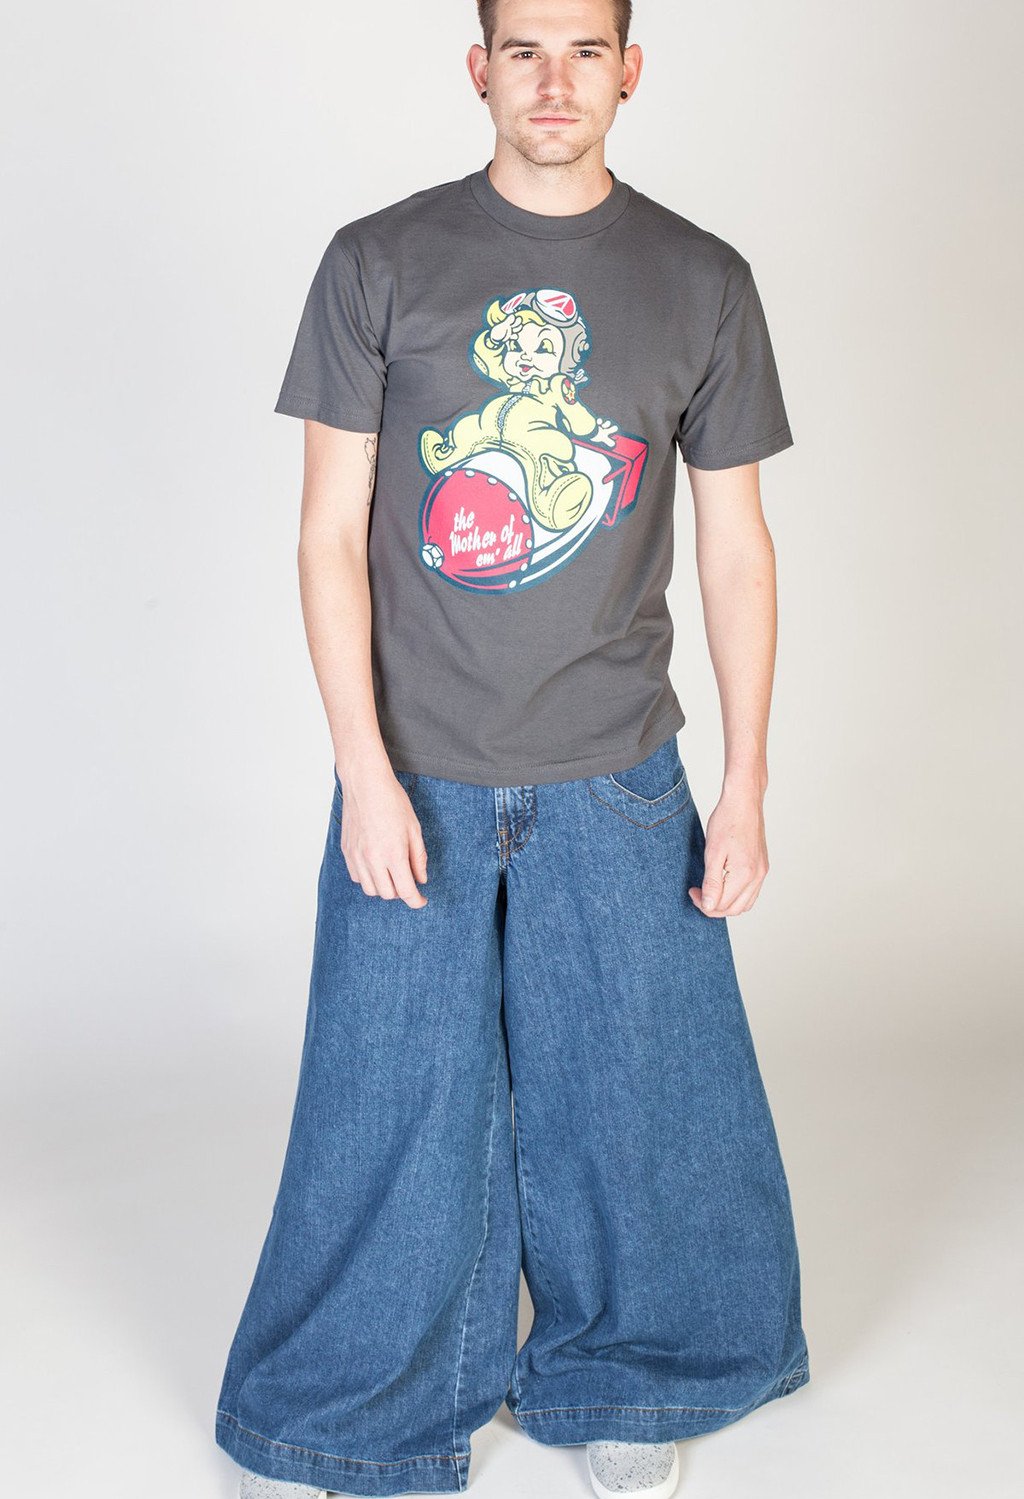 jncos for sale